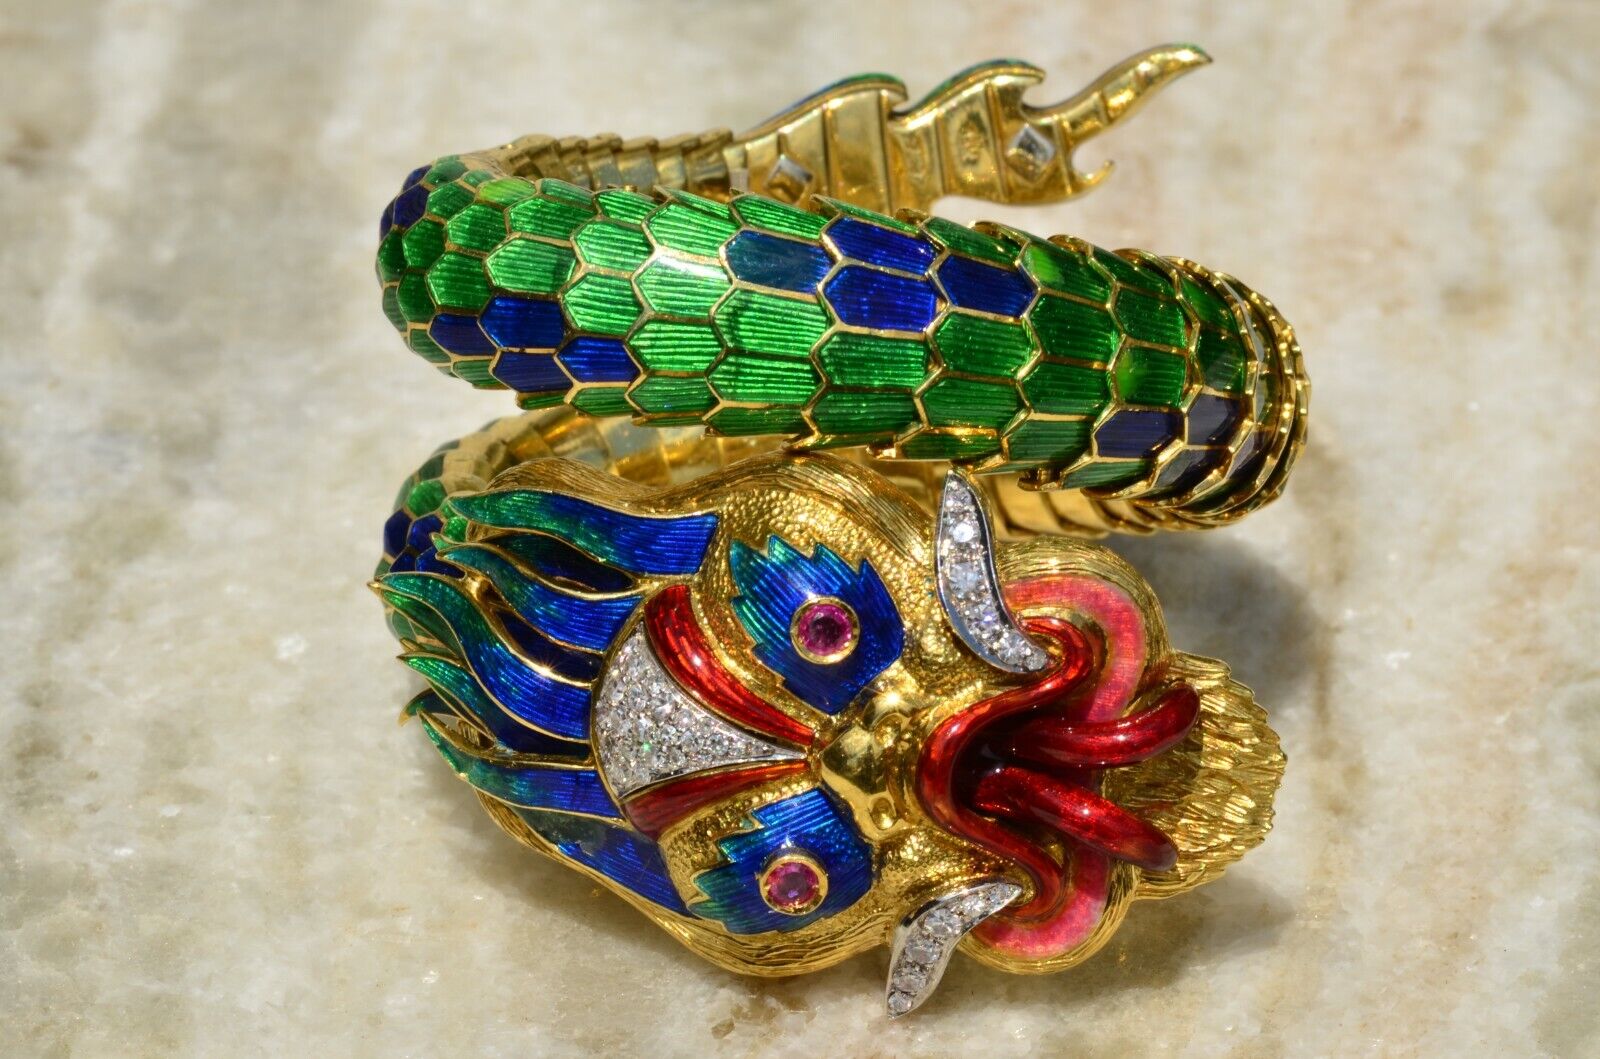 Incredible Flexible Dragon Bracelet set with Rubies, Diamonds and Finished with 